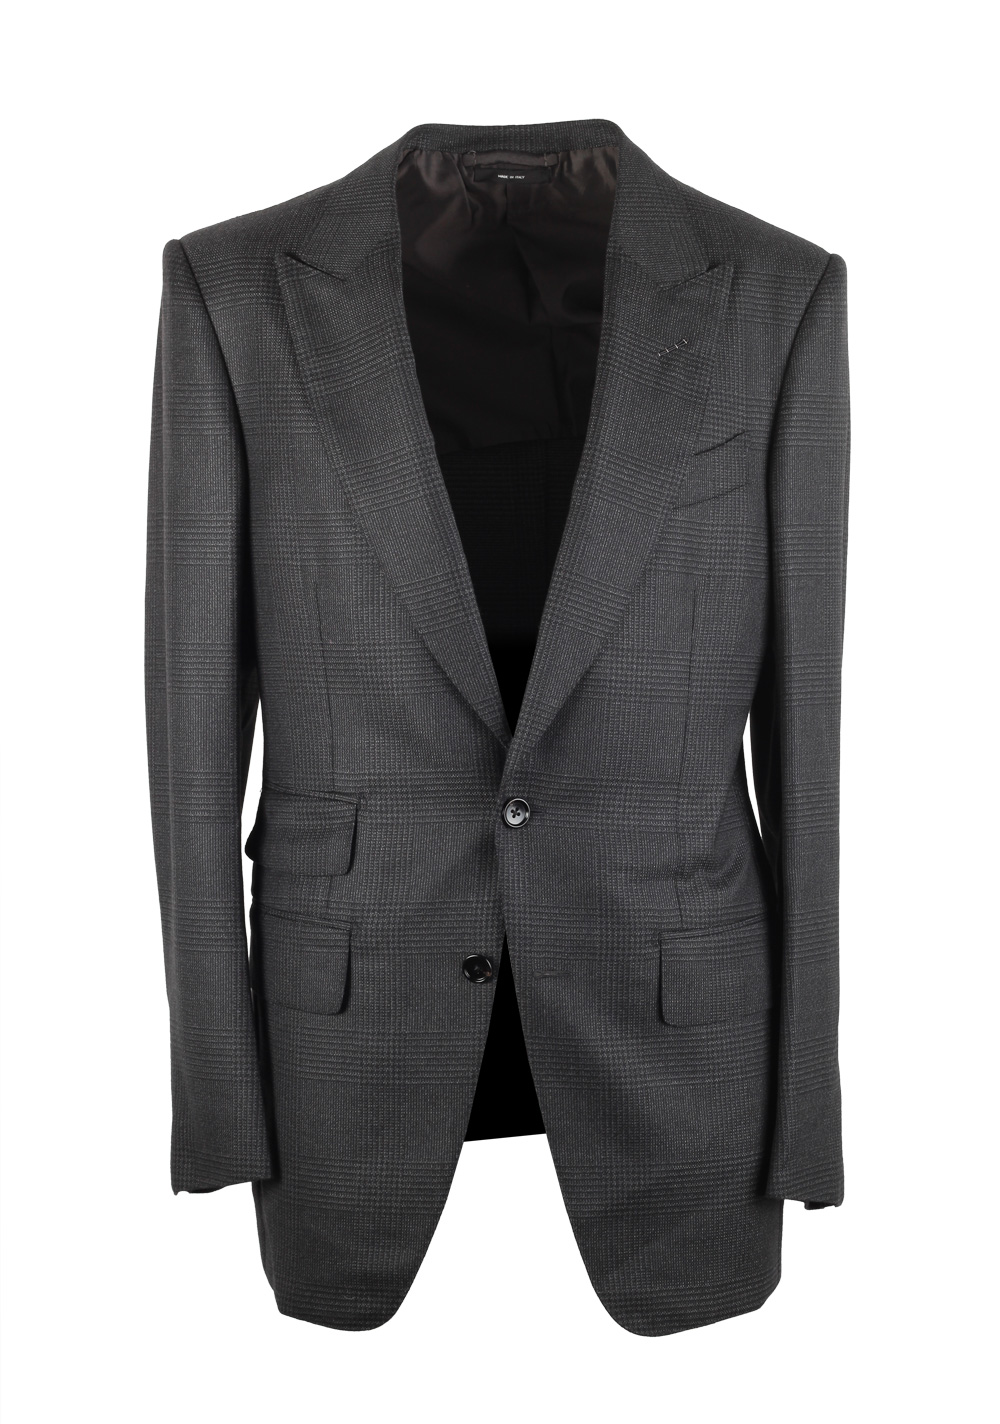 TOM FORD Atticus Gray Checked Suit Size 46 / 36R U.S. | Costume Limité